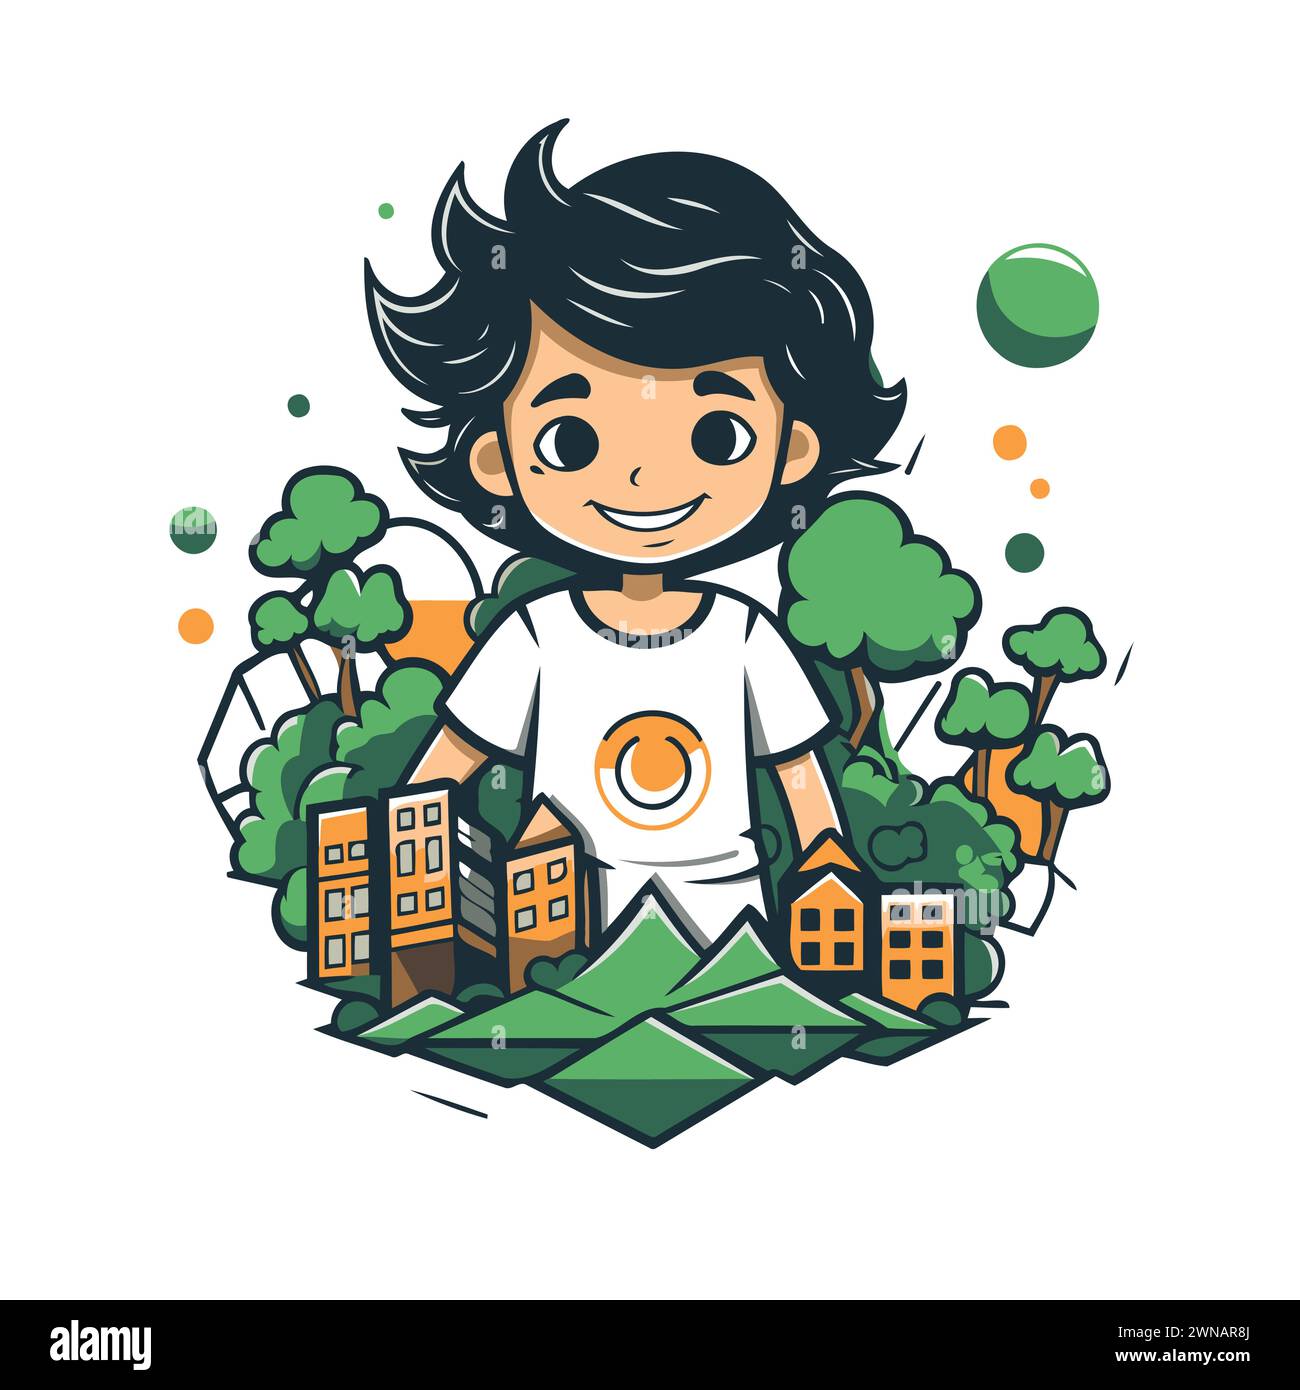 Vector illustration of a boy in a city park with buildings and trees. Stock Vector